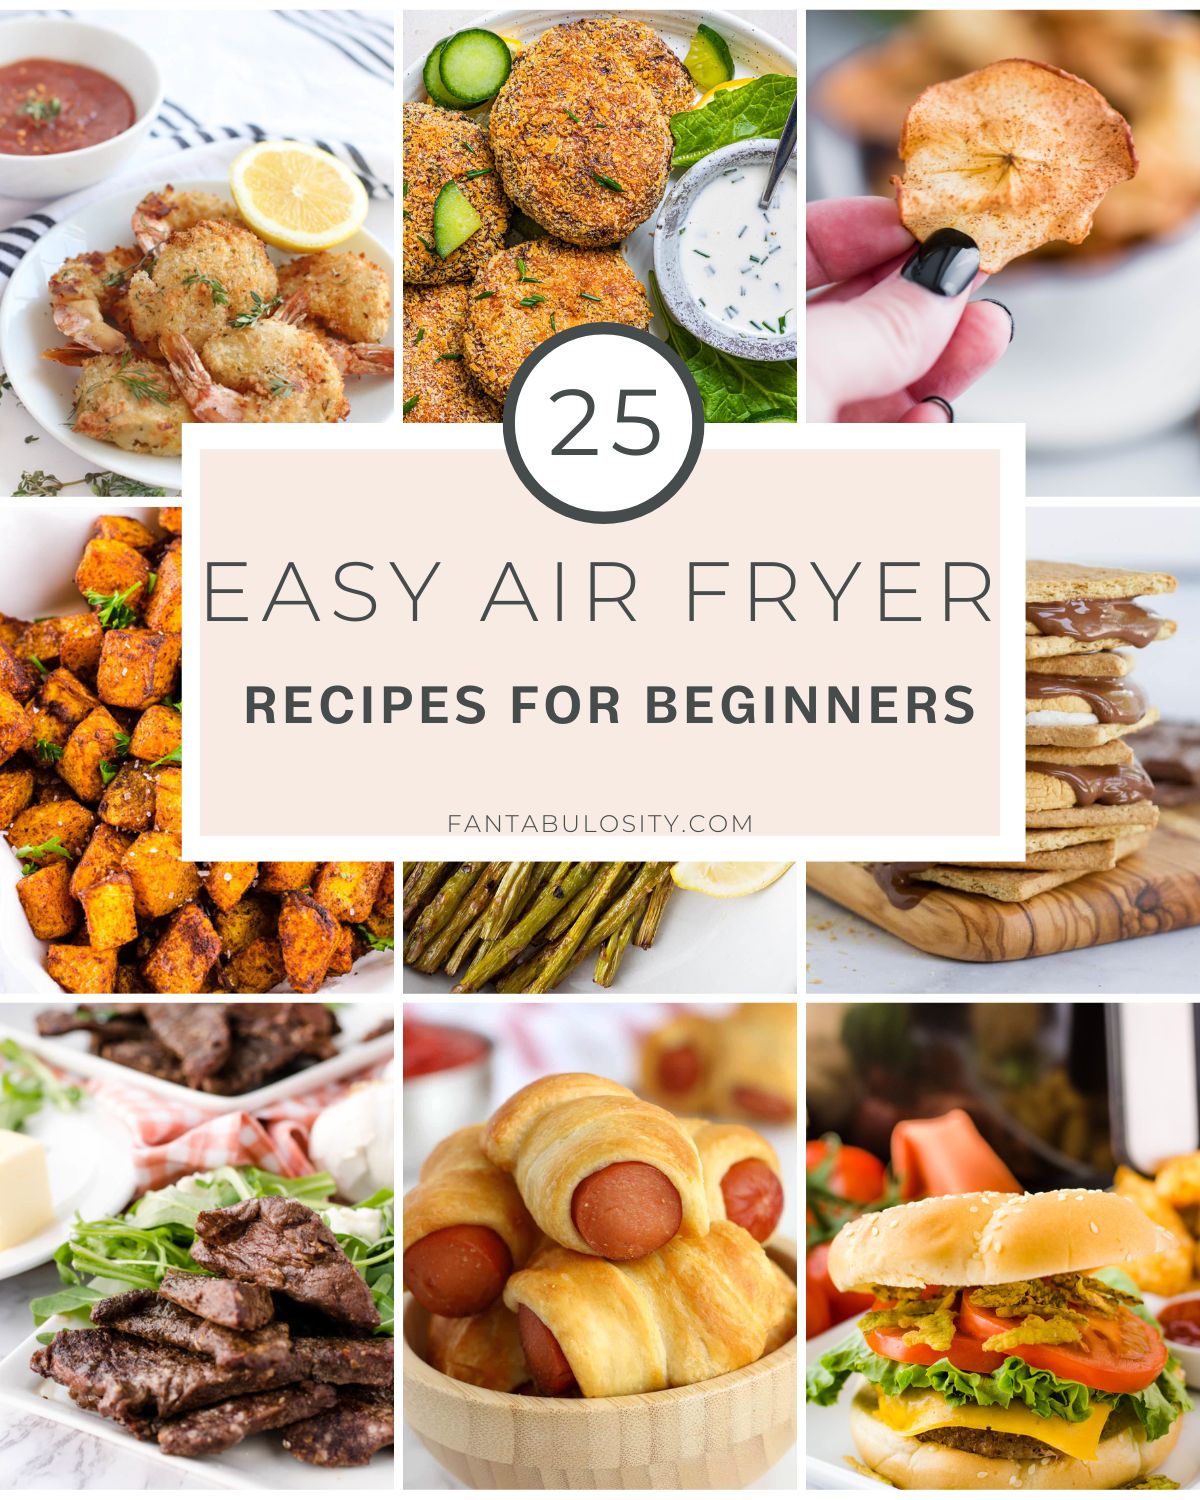 Air fryer recipes collage and text overlay.